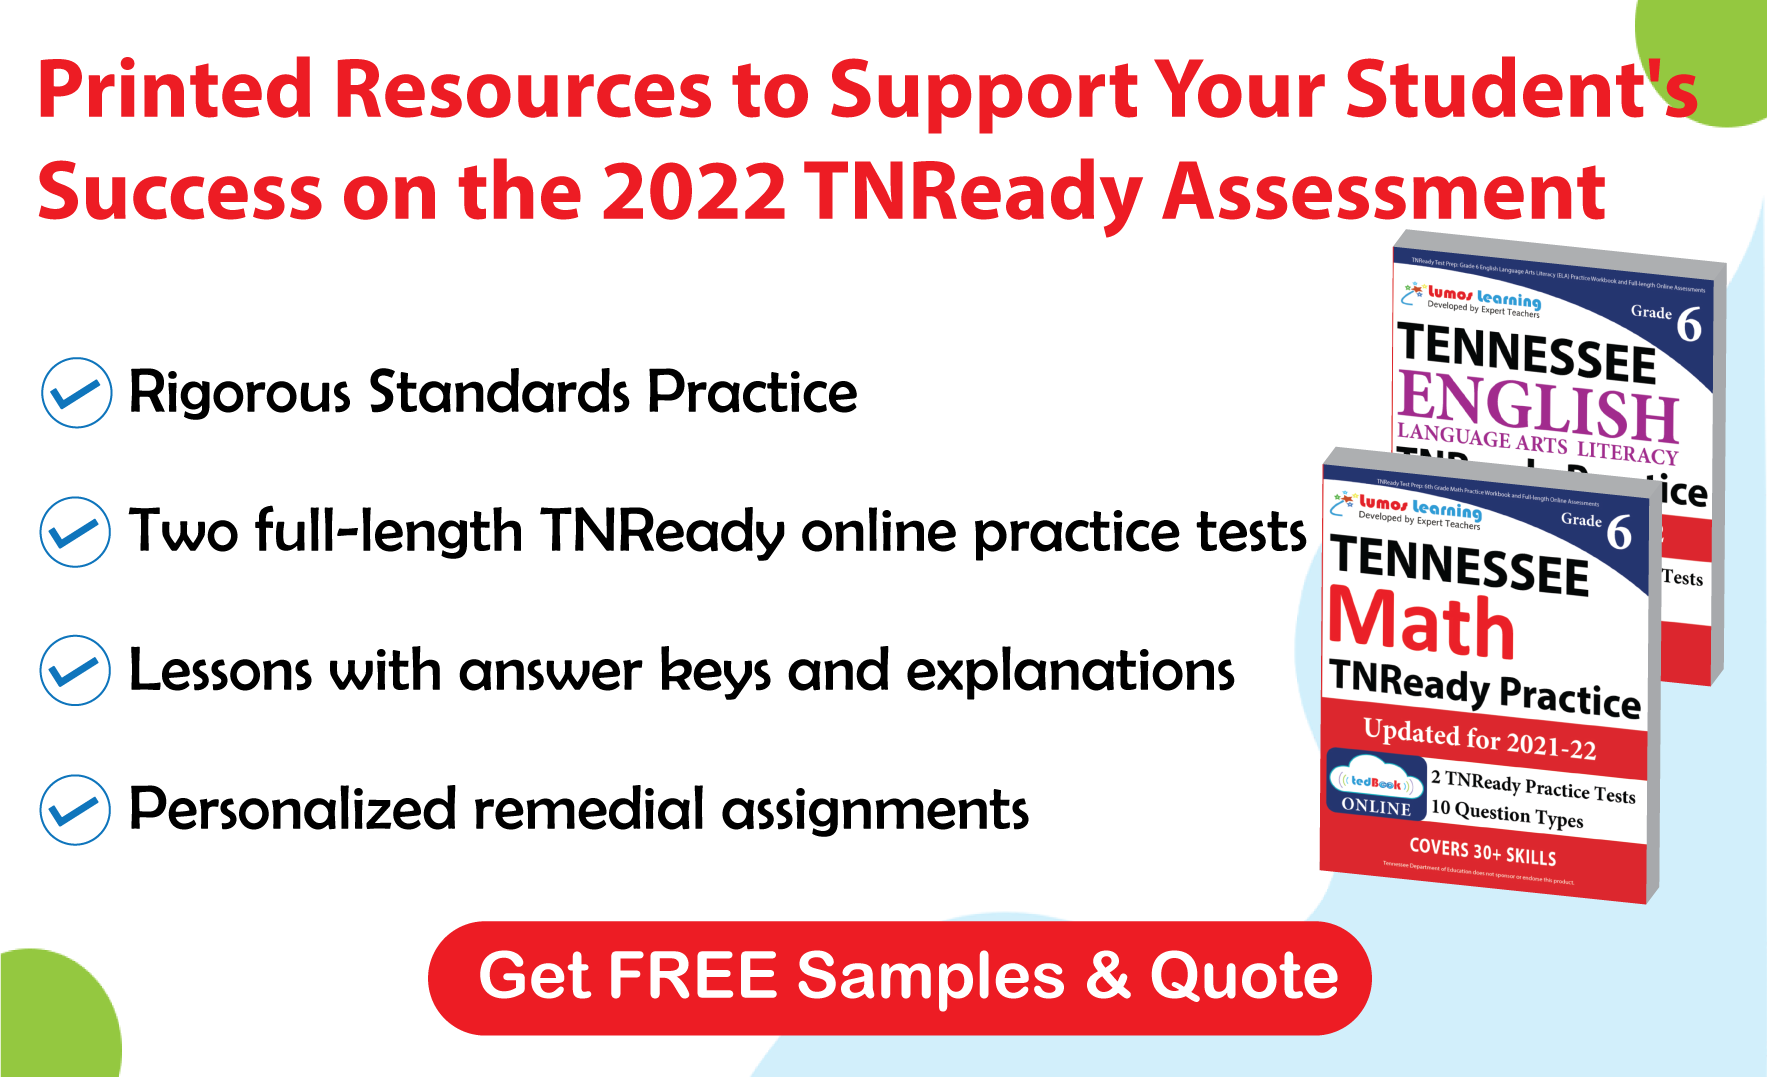 Lumos tedBook™ offers both Math and ELA printed workbooks, that are specifically designed to improve student achievement and help them succeed on the TNREADY Assessments.